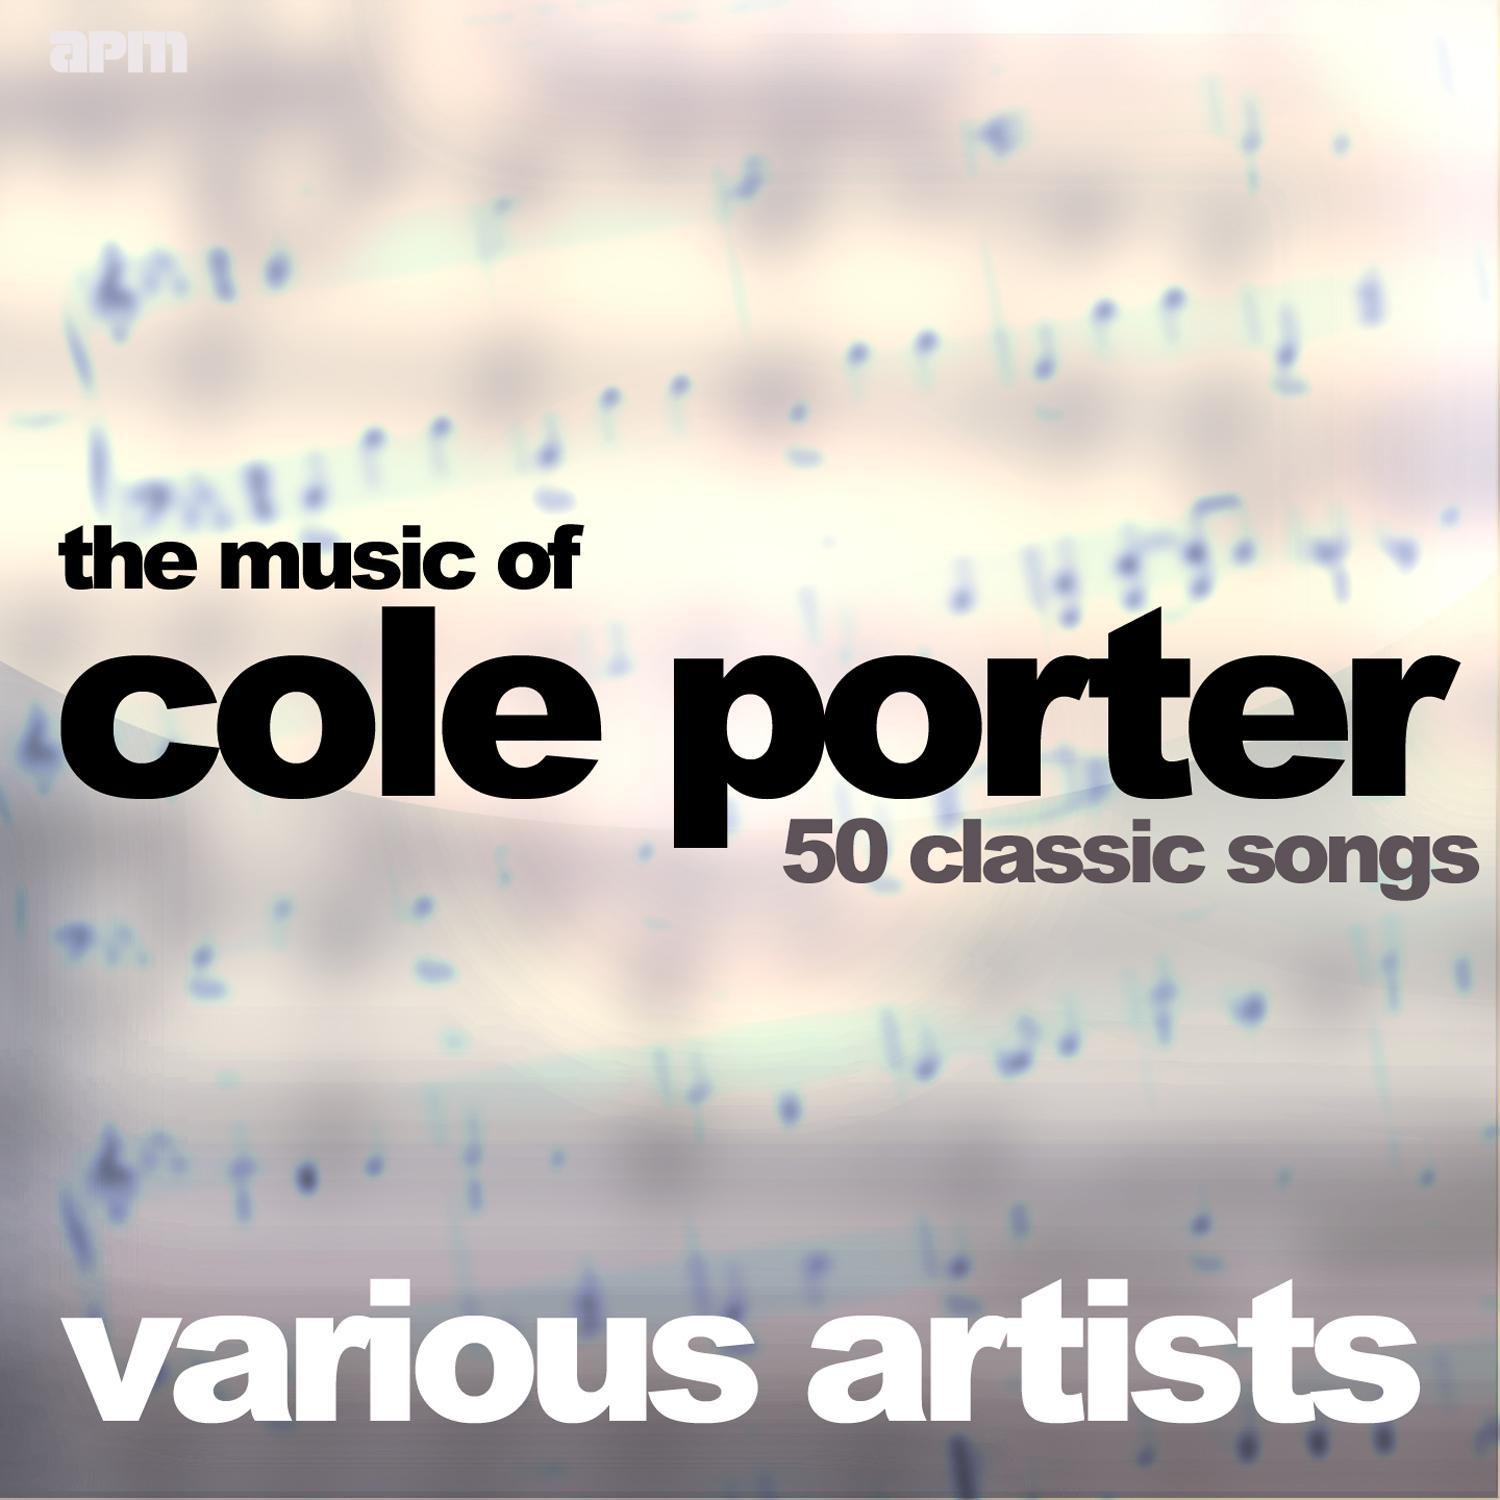 The Music of Cole Porter - 50 Classic Songs